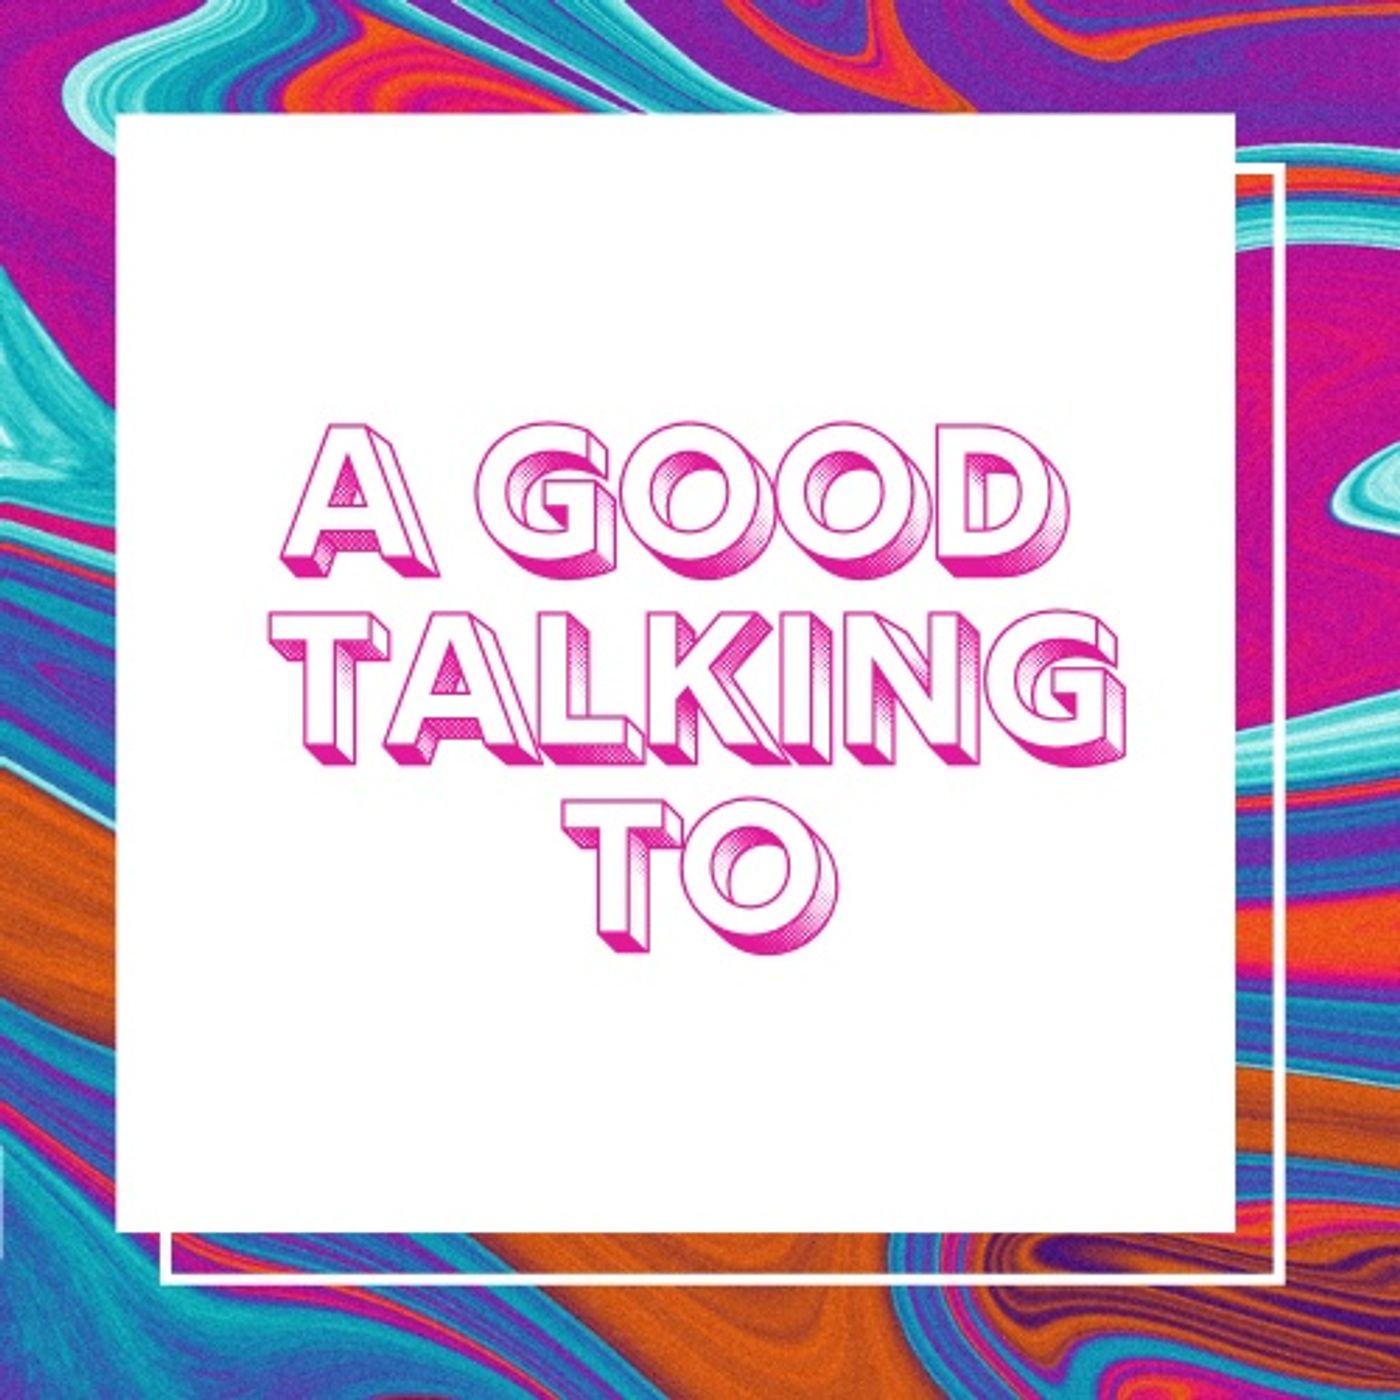 A Good Talking To